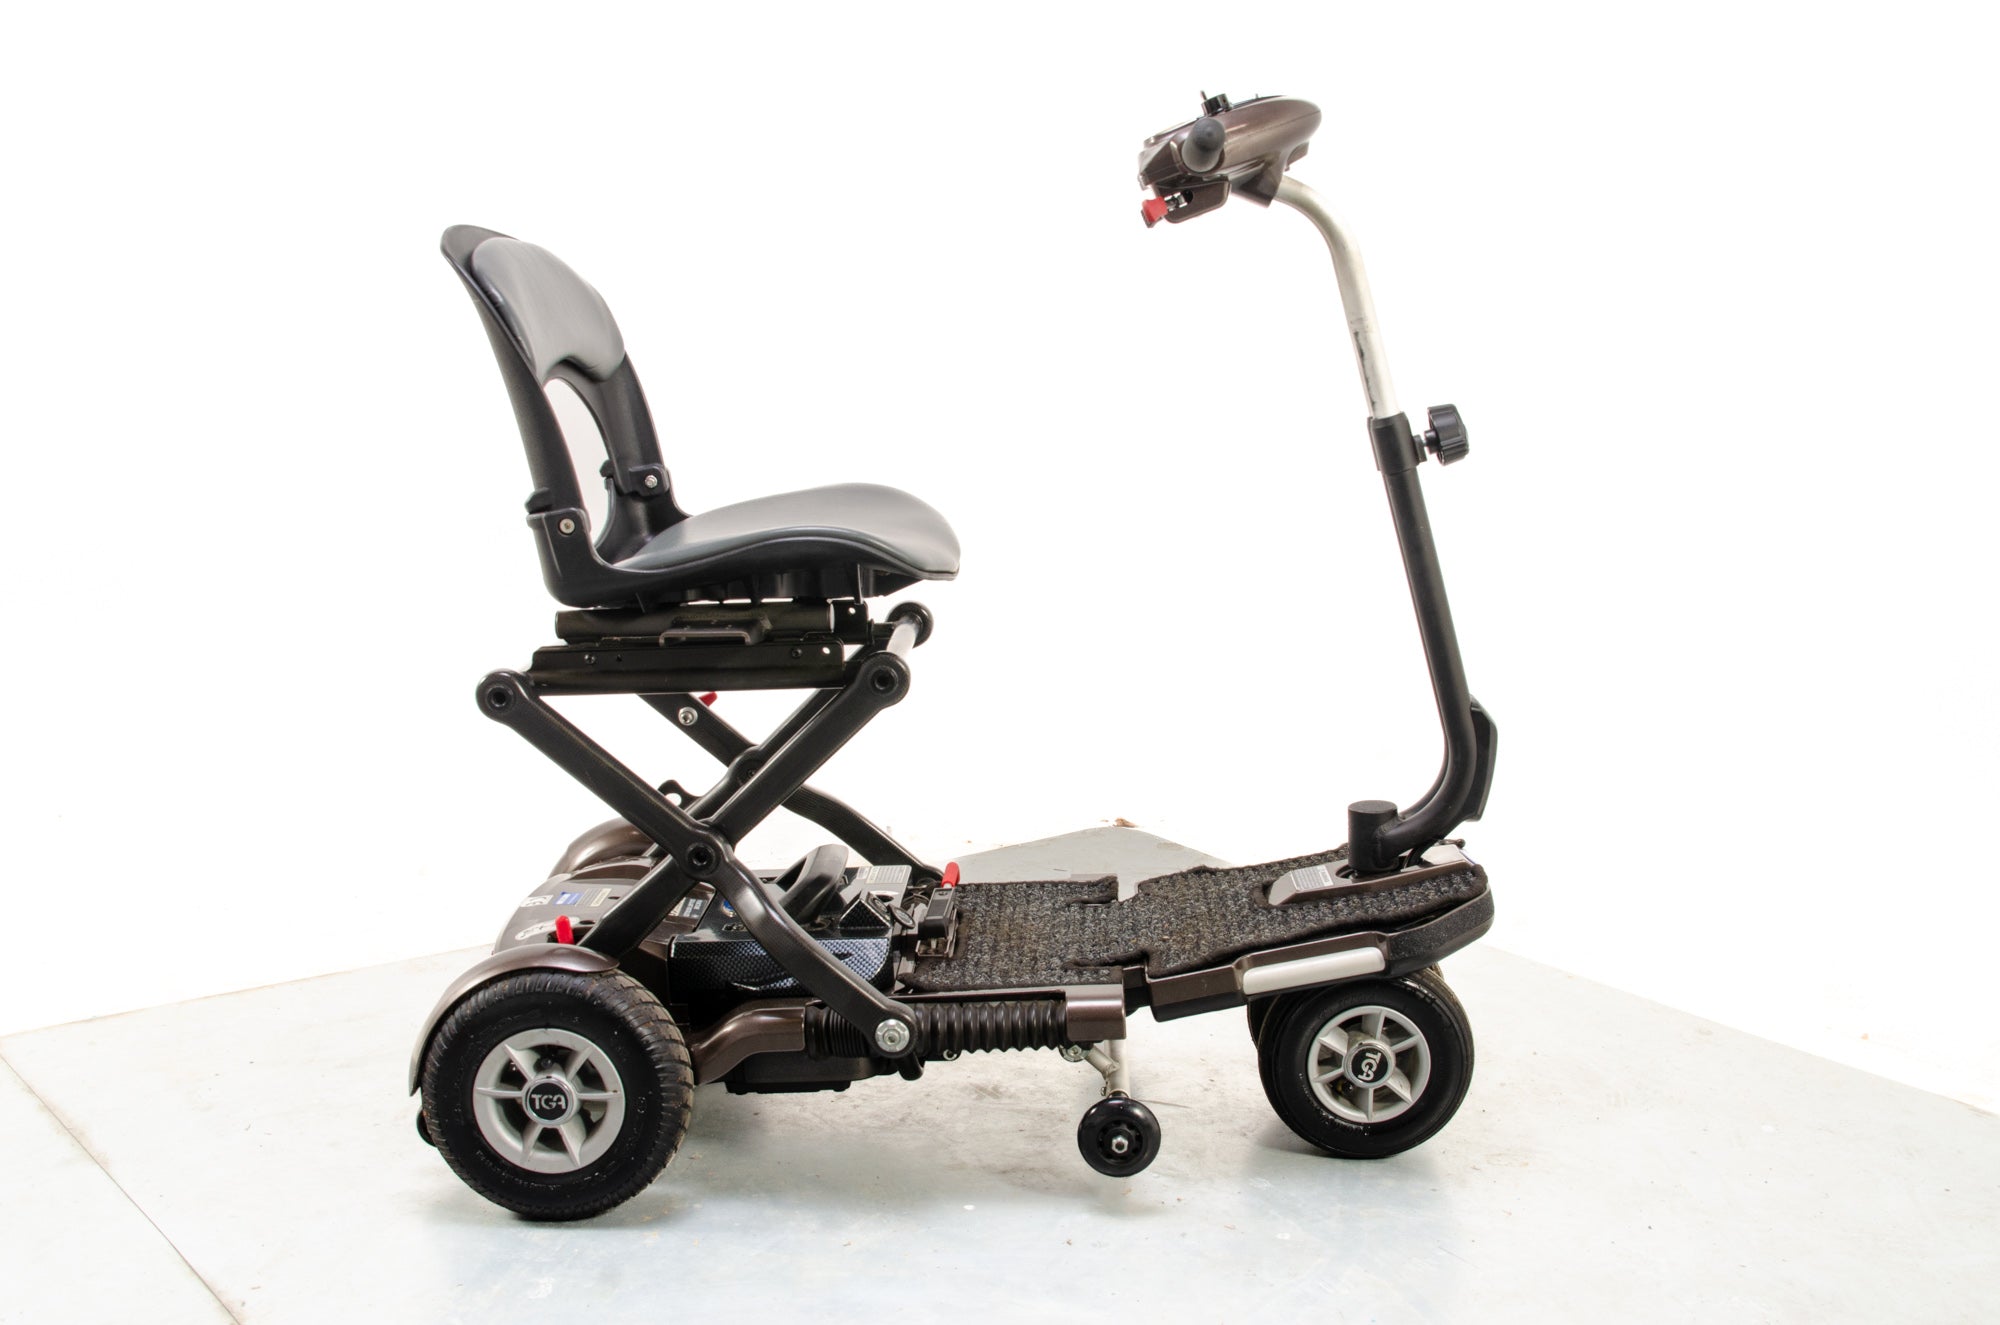 TGA Minimo Used Mobility Scooter Small Compact Folding Travel Lithium Battery Lightweight 16005